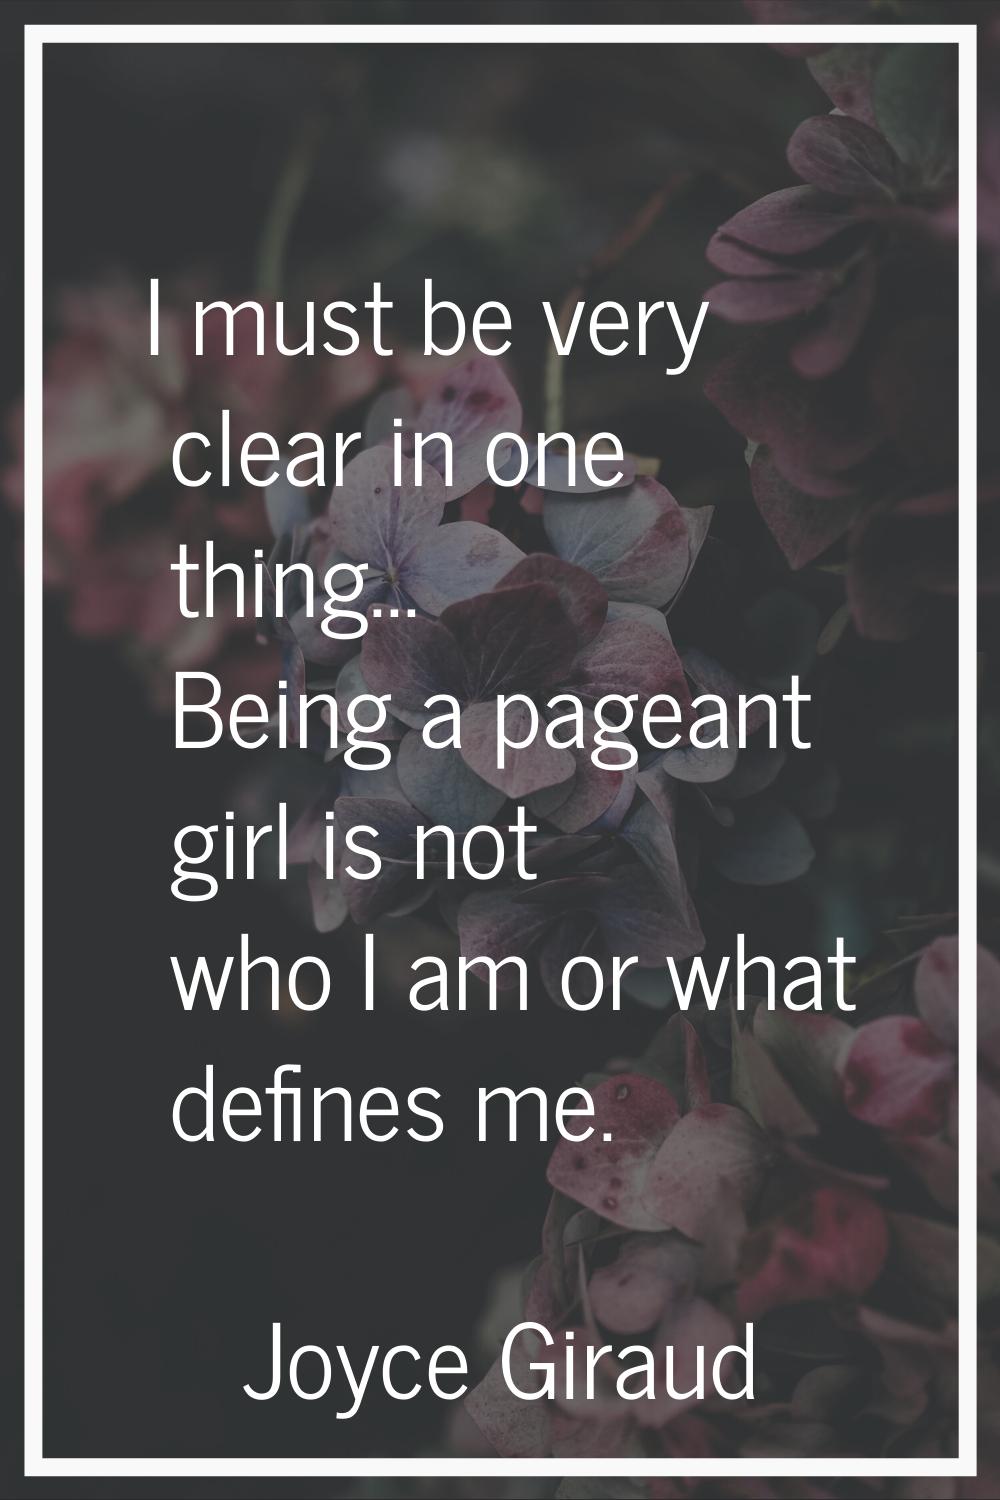 I must be very clear in one thing... Being a pageant girl is not who I am or what defines me.